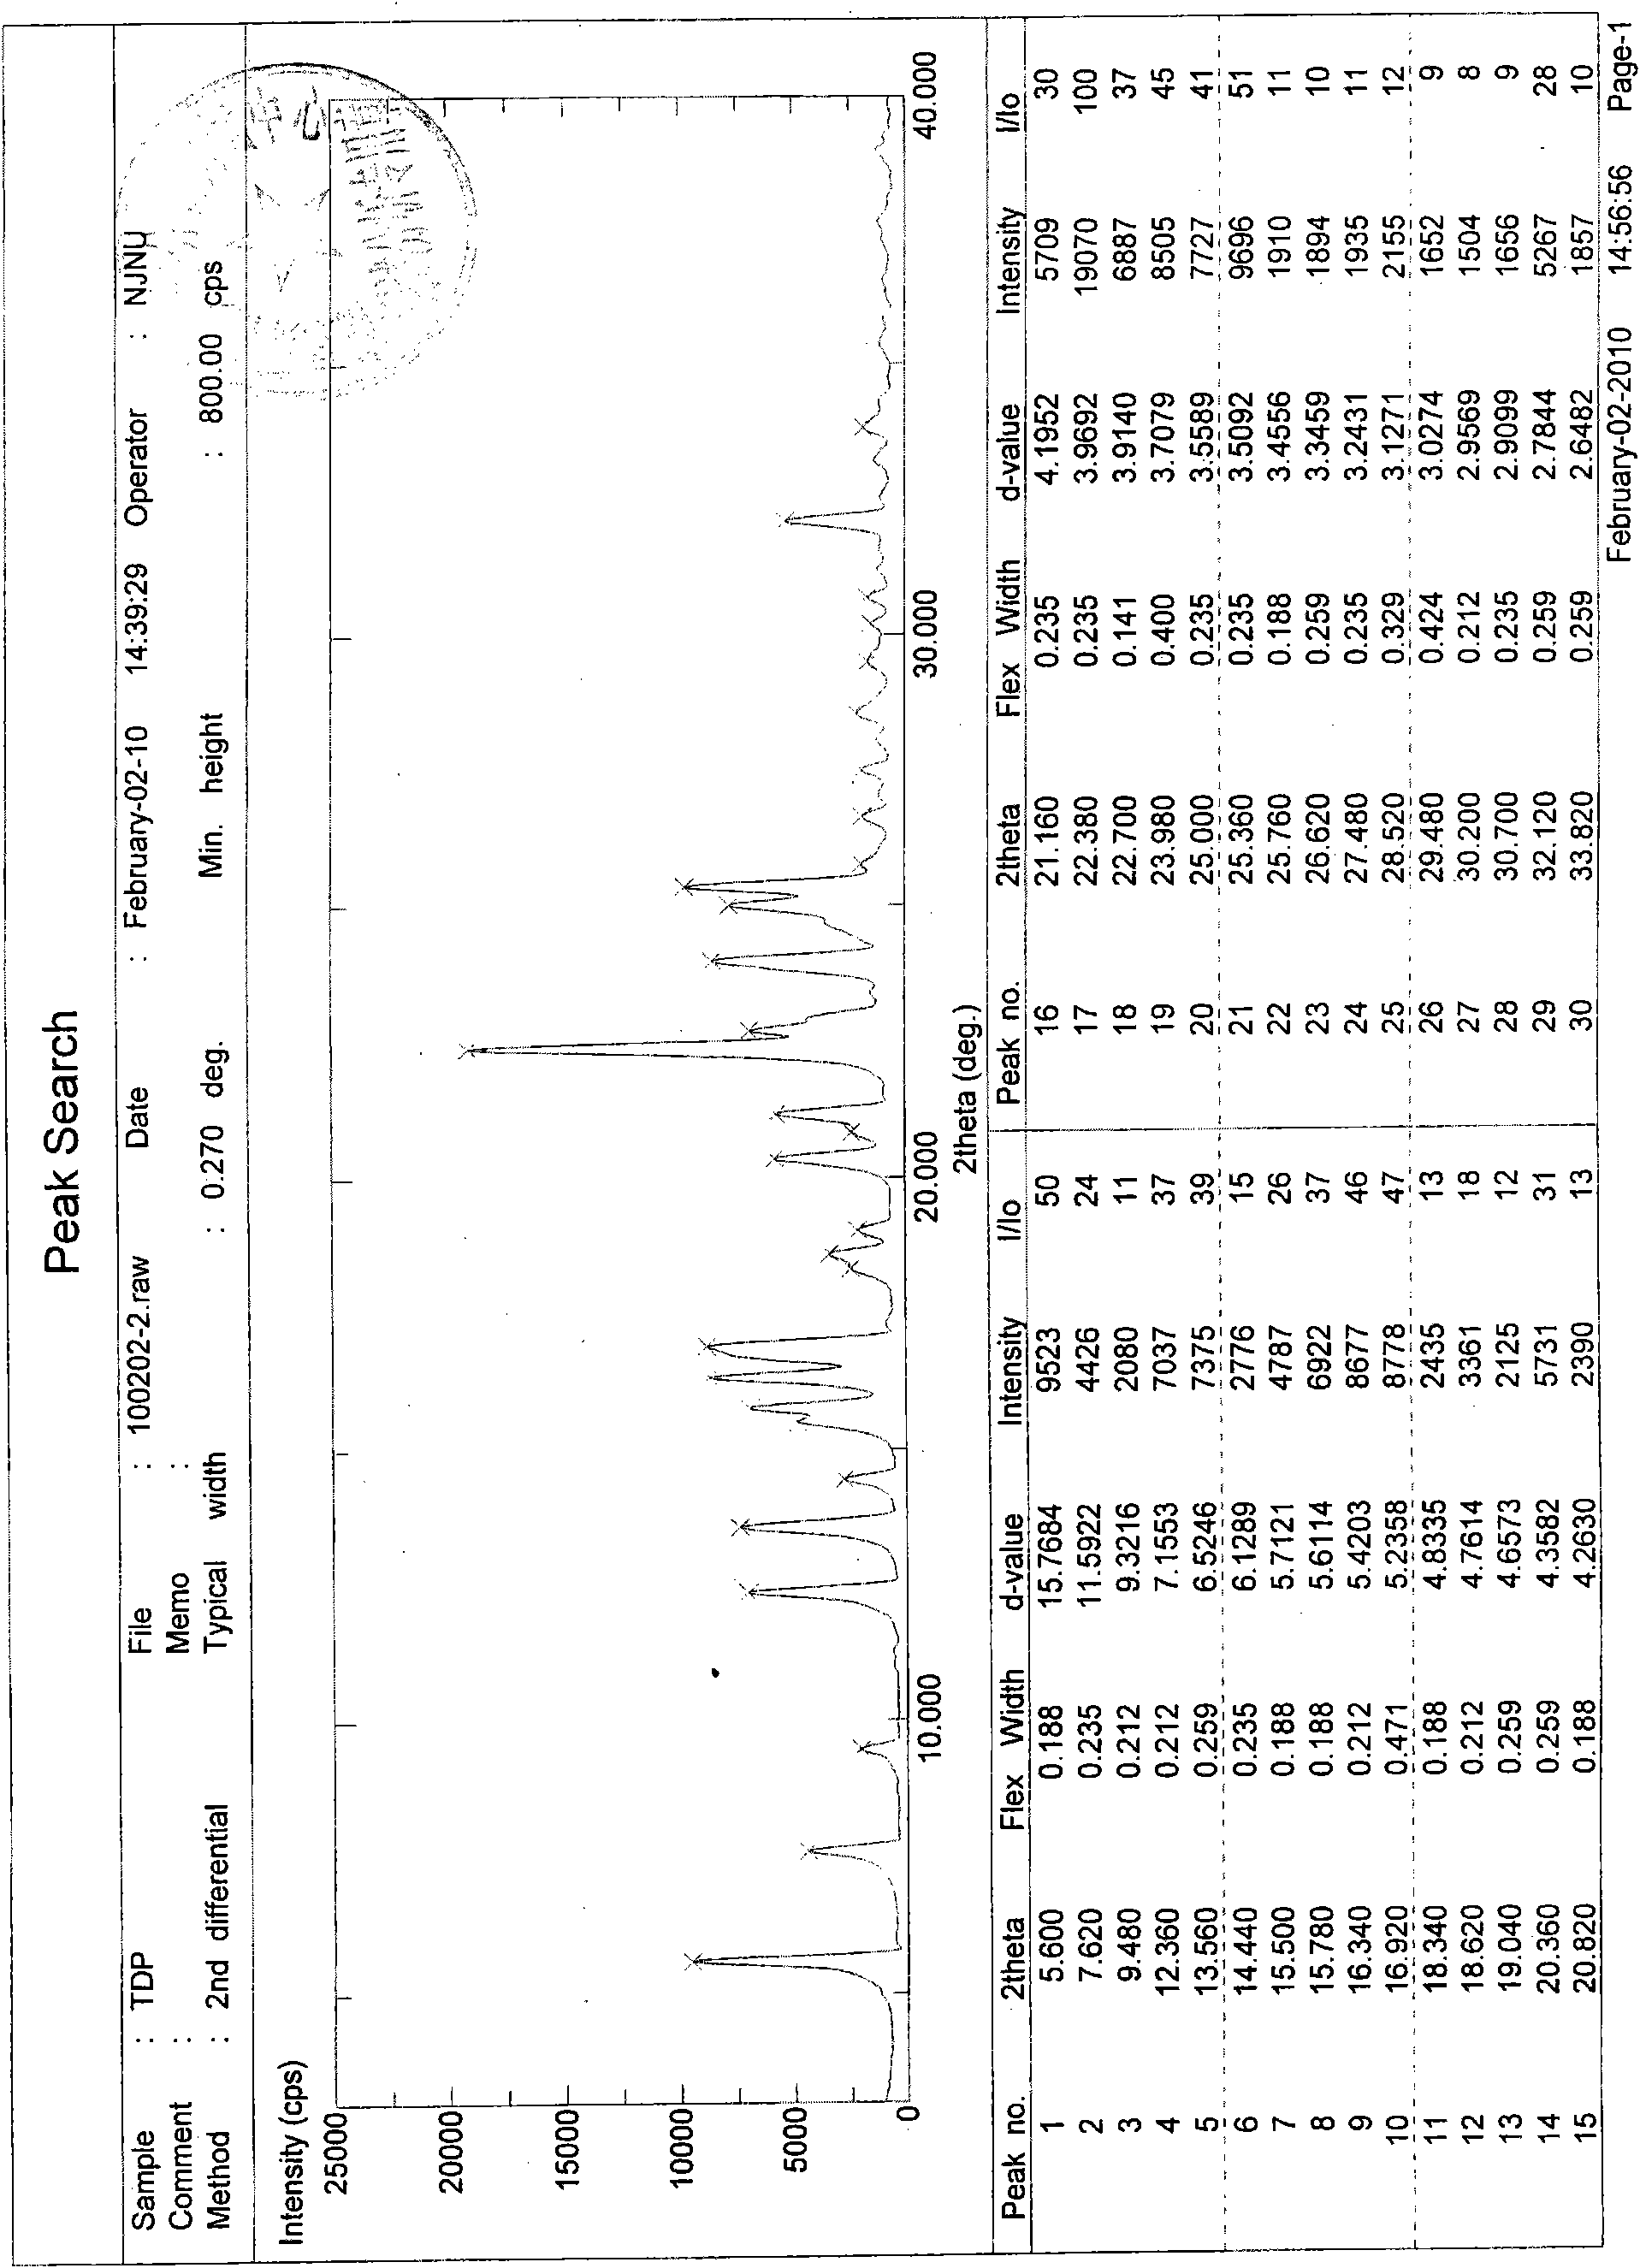 Salt compound of tenofovir disoproxil fumarate and preparation method and medicinal application thereof